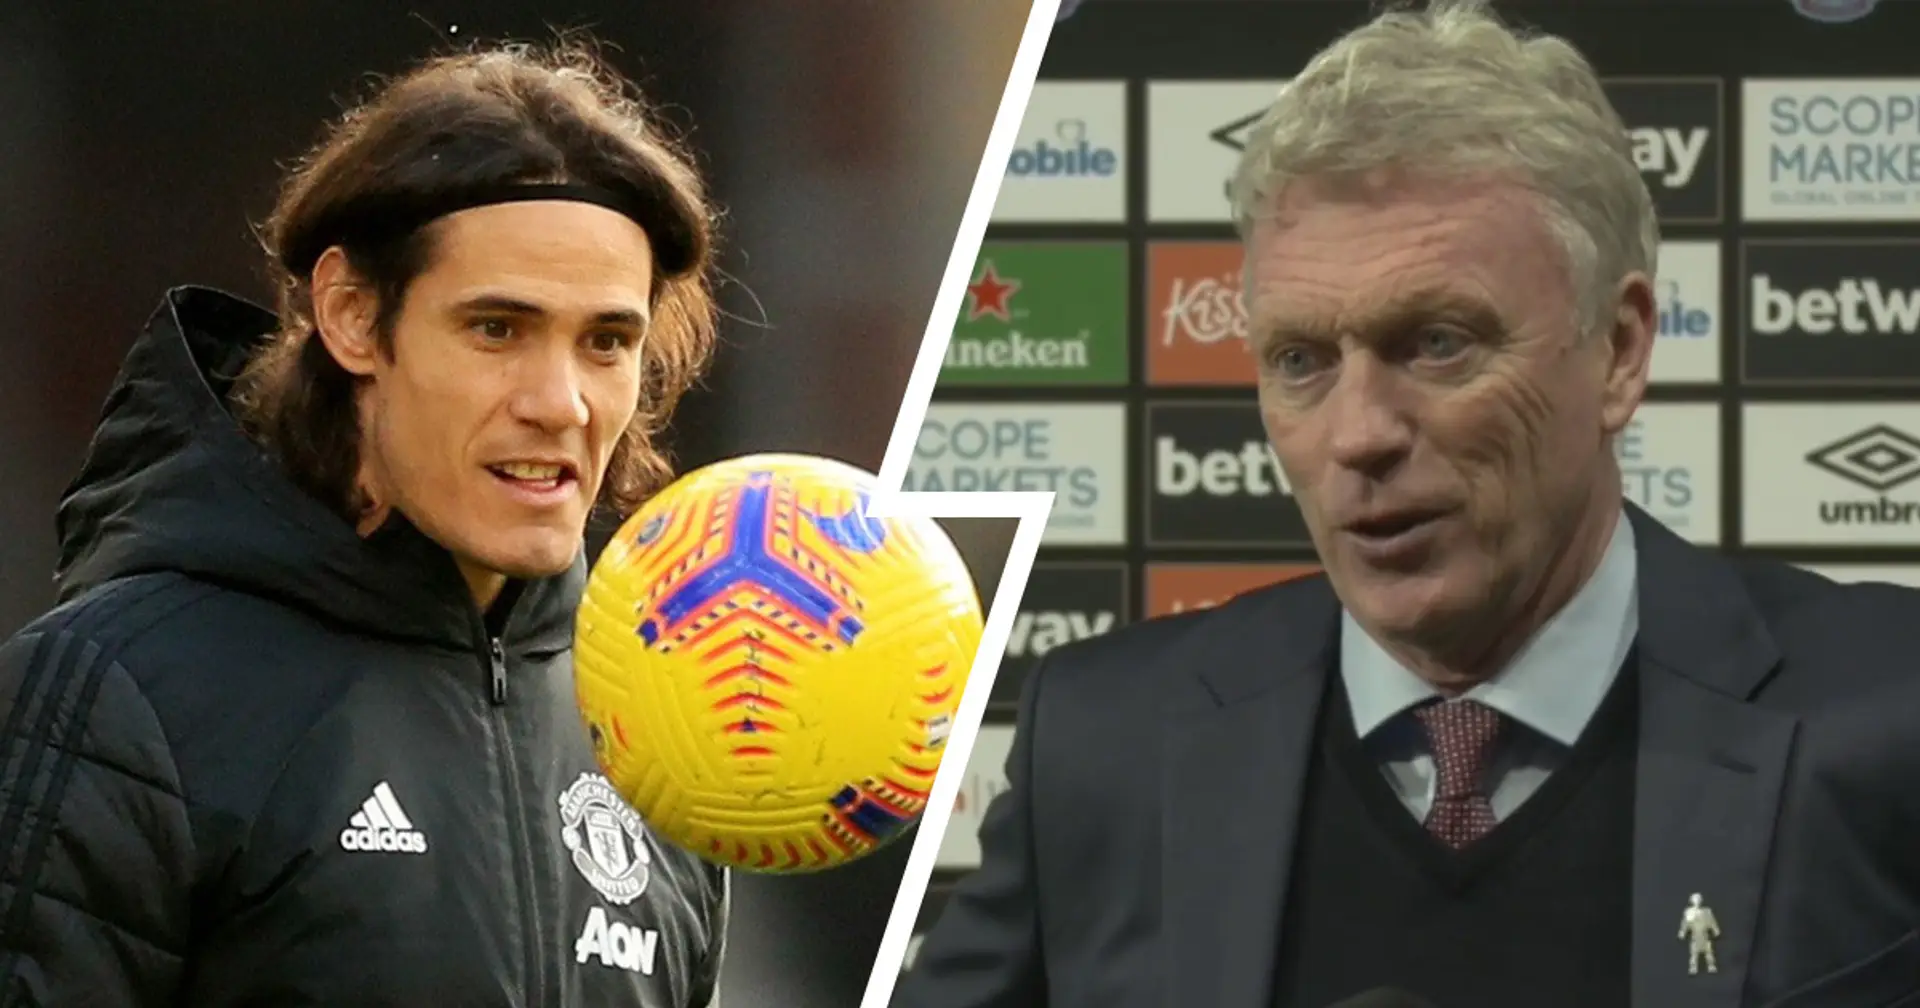 'That's true. We were watching him closely at the time': David Moyes confirms he rejected Cavani's move to United in 2013